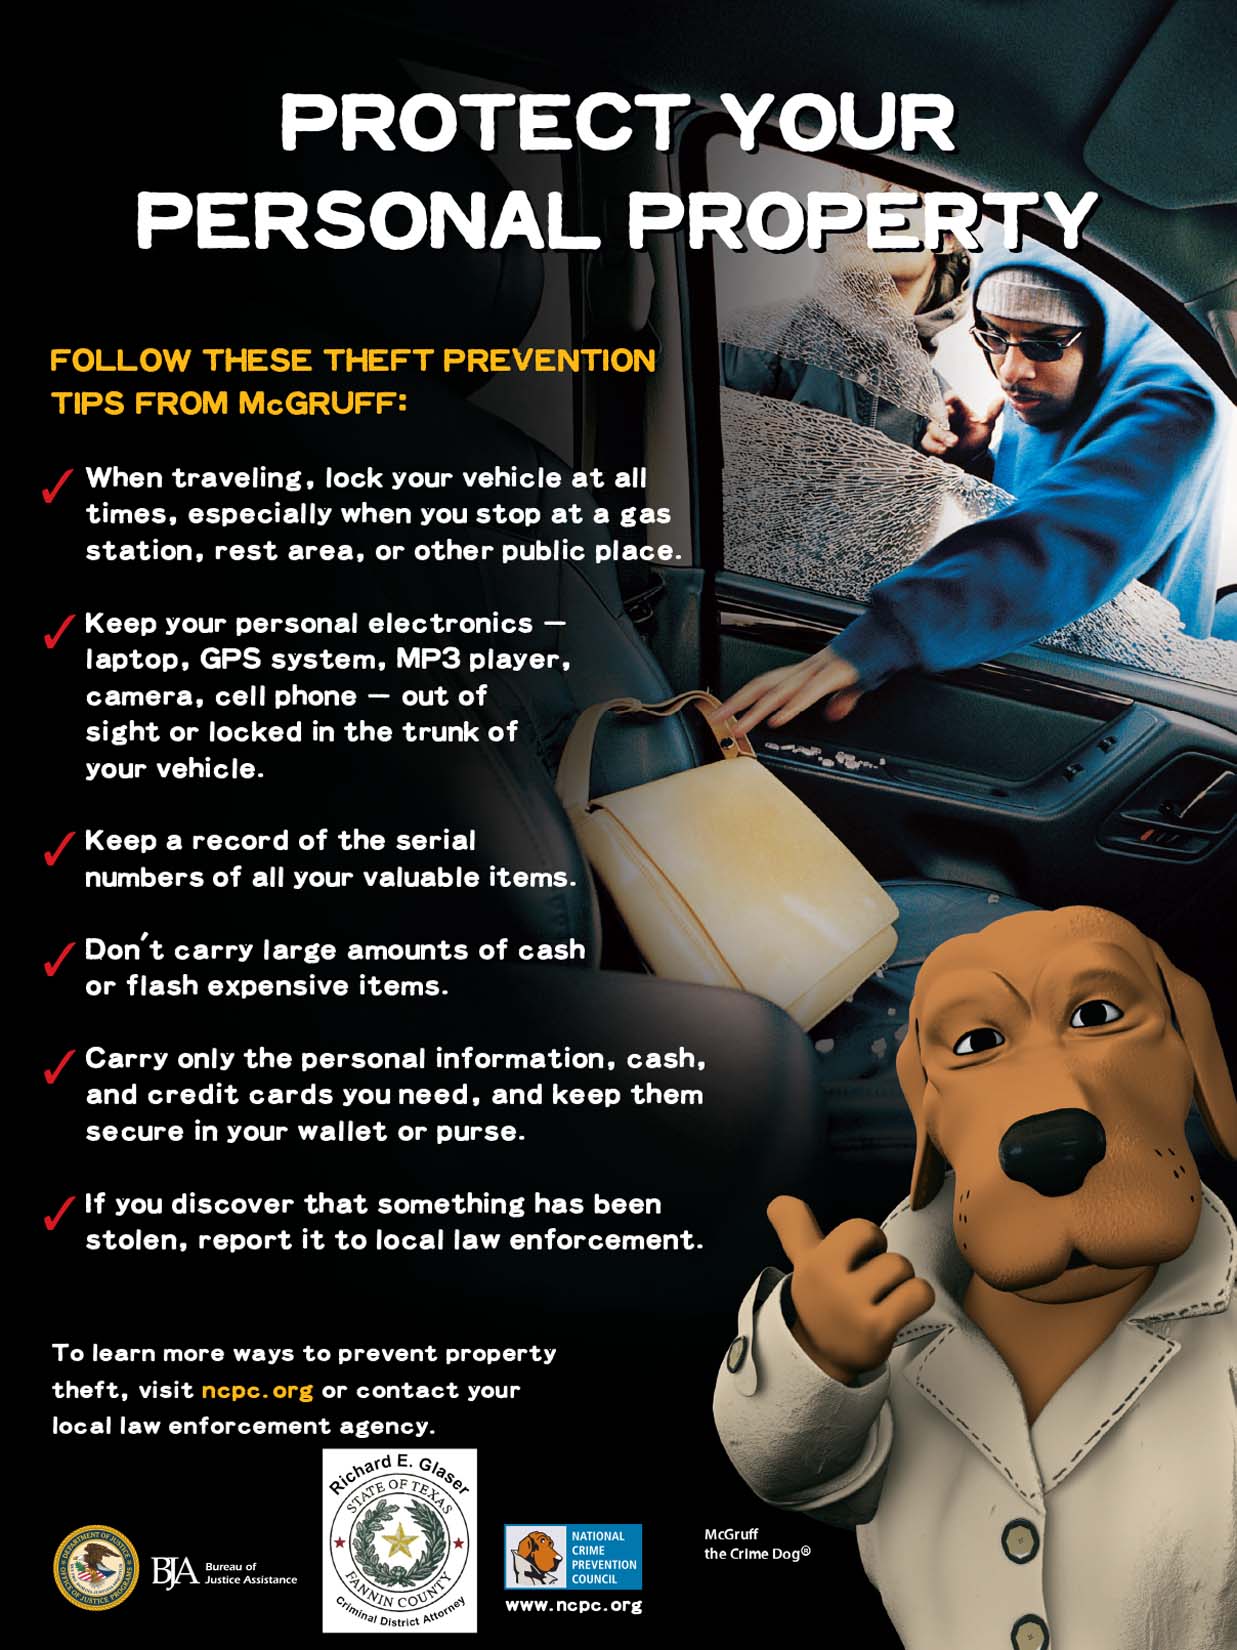 Protect your Personal Property -- PROTEJA SU COSAS PERSONALES